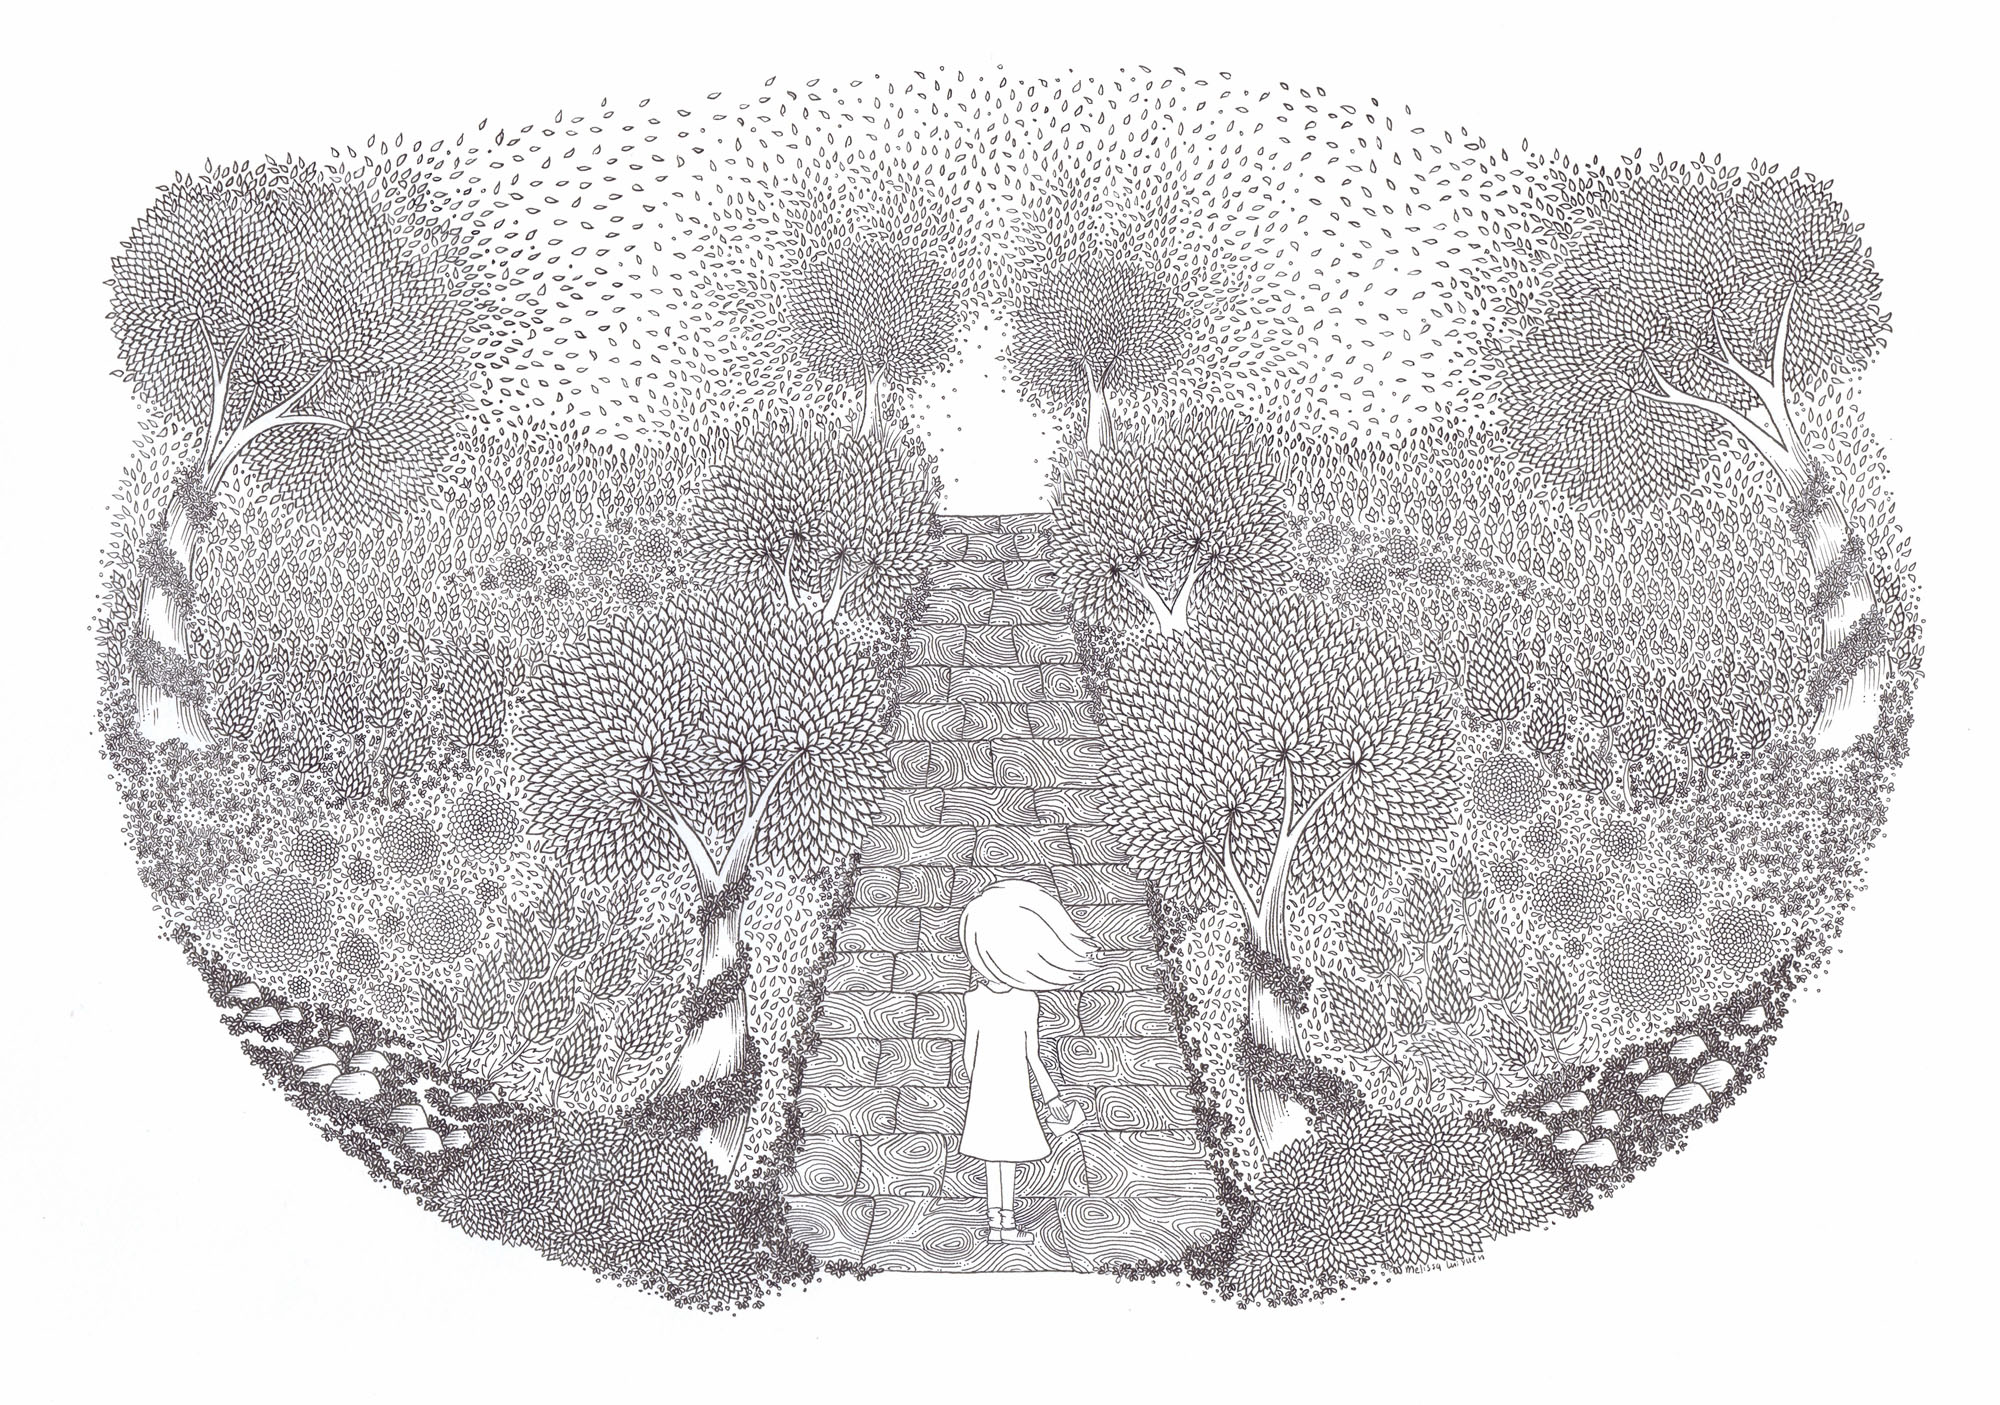 A black and white sketch of a girl walking down a path into a garden